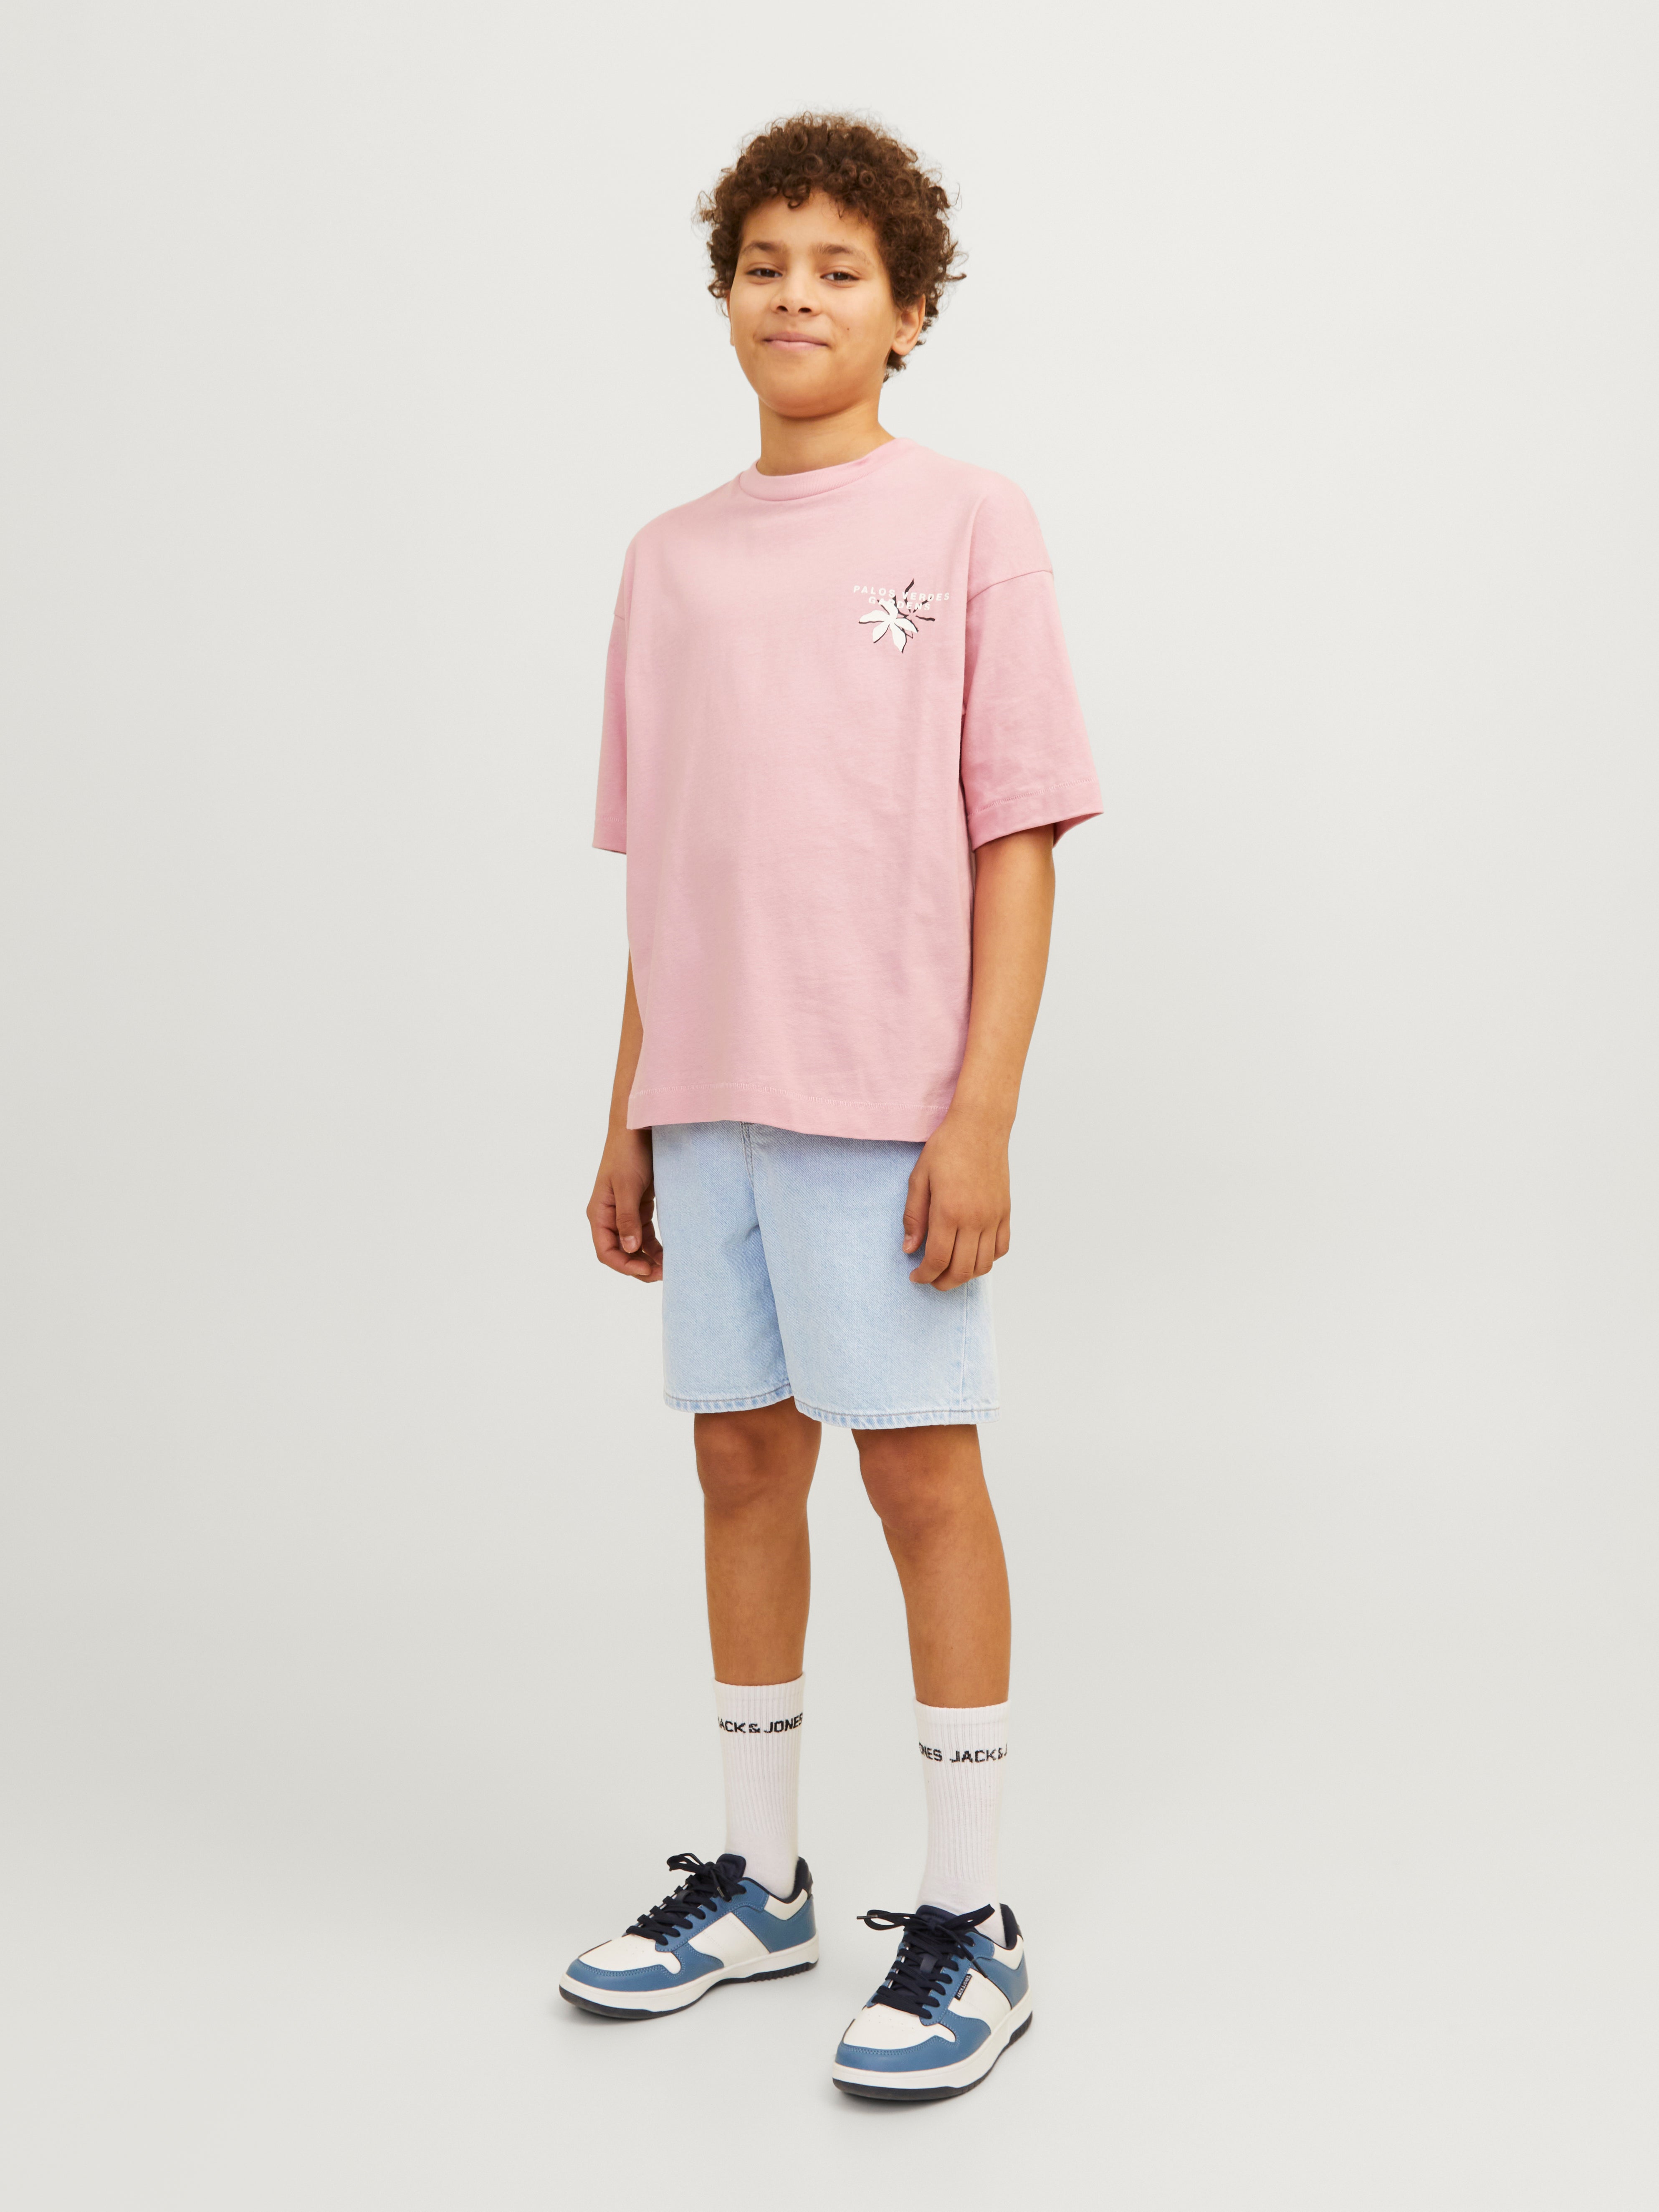 Baggy fit Baggy fit shorts For boys